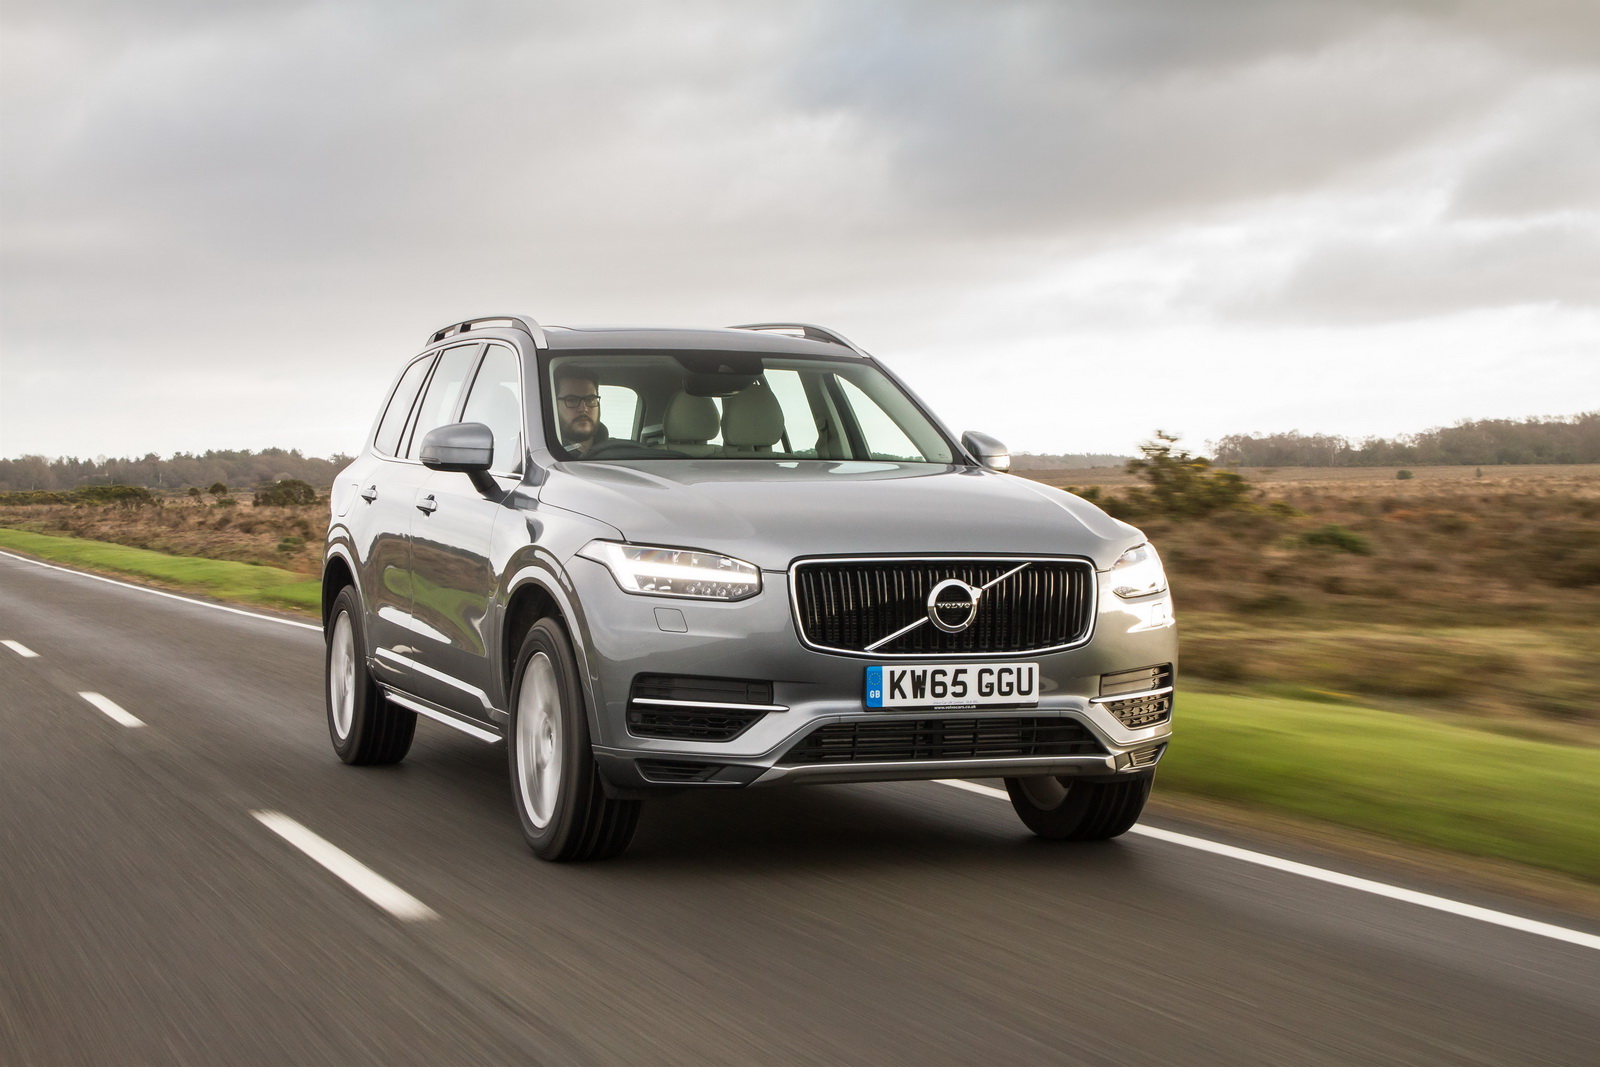 Volvo's S90, V90 And XC90 Family Might Gain 3-Cylinder Engines